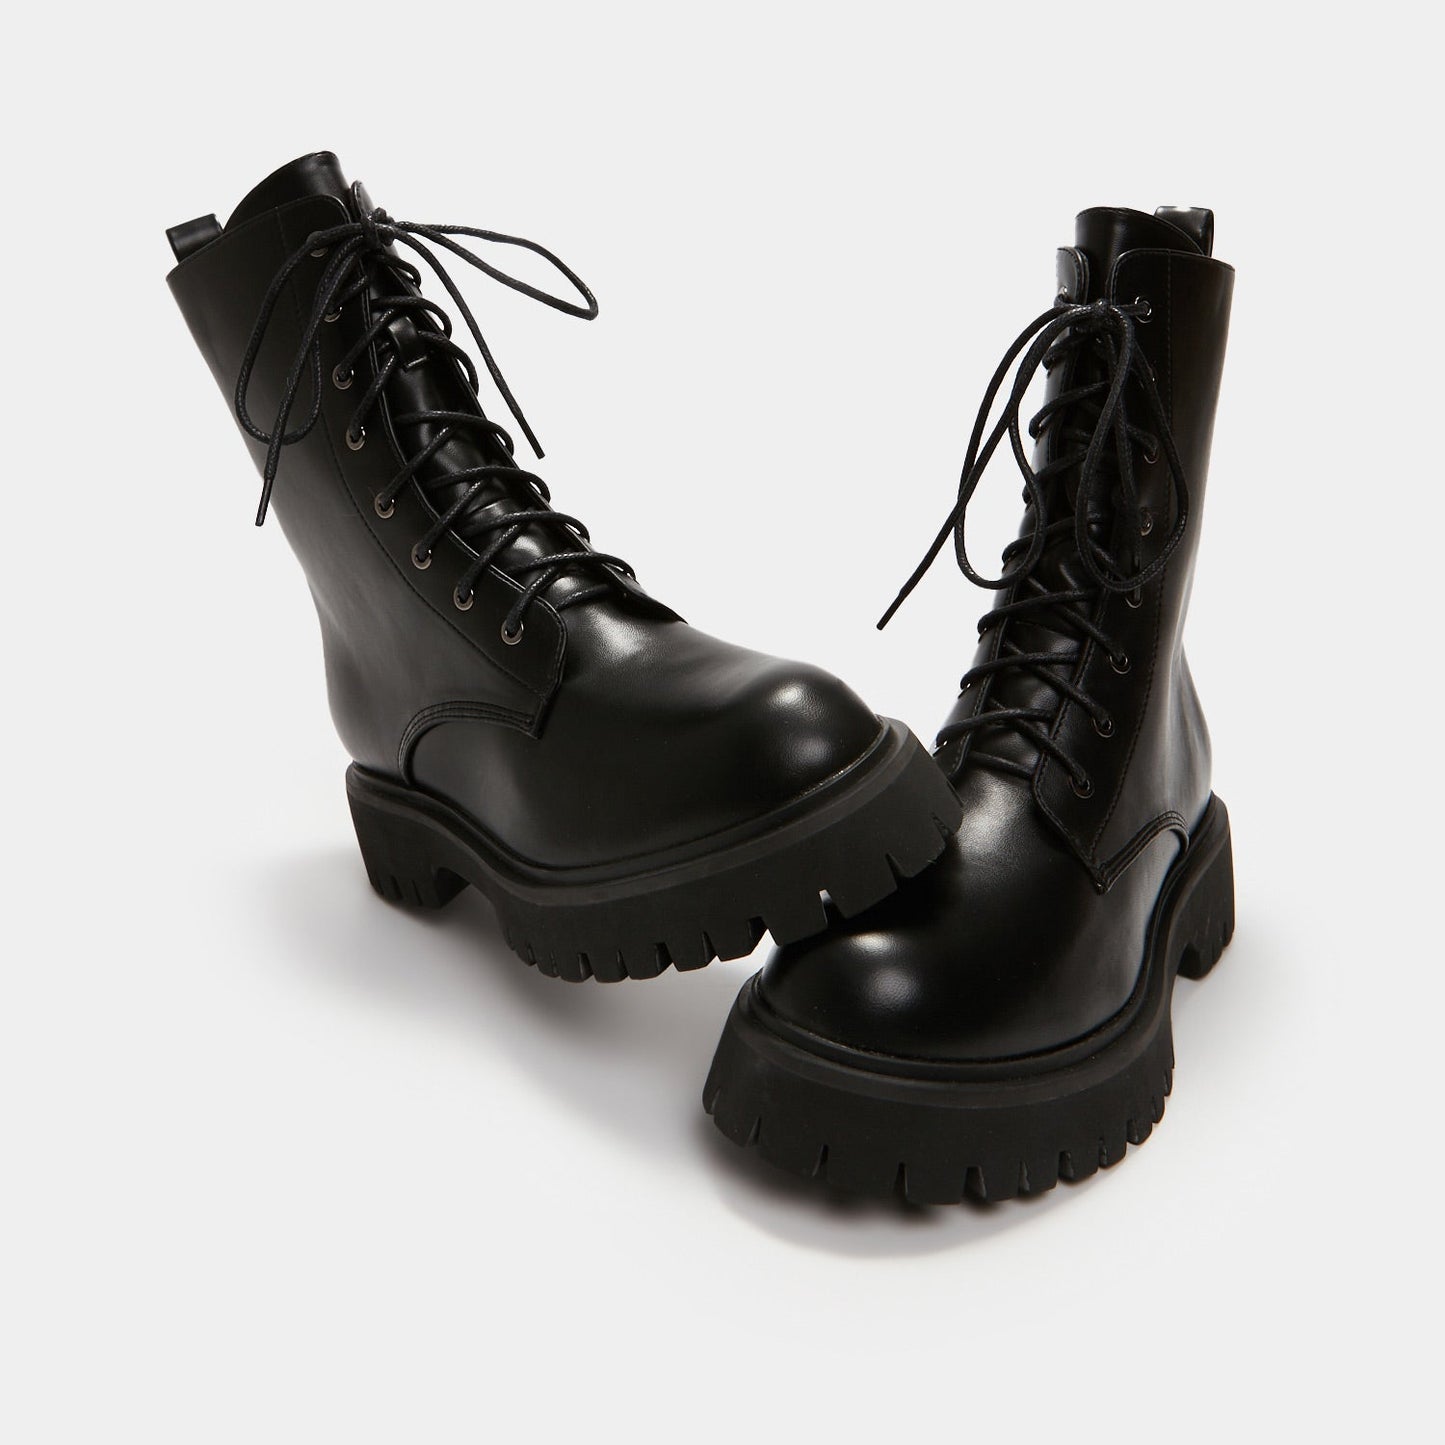 Anchor Black Military Lace Up Boots - Ankle Boots - KOI Footwear - Black - Front View